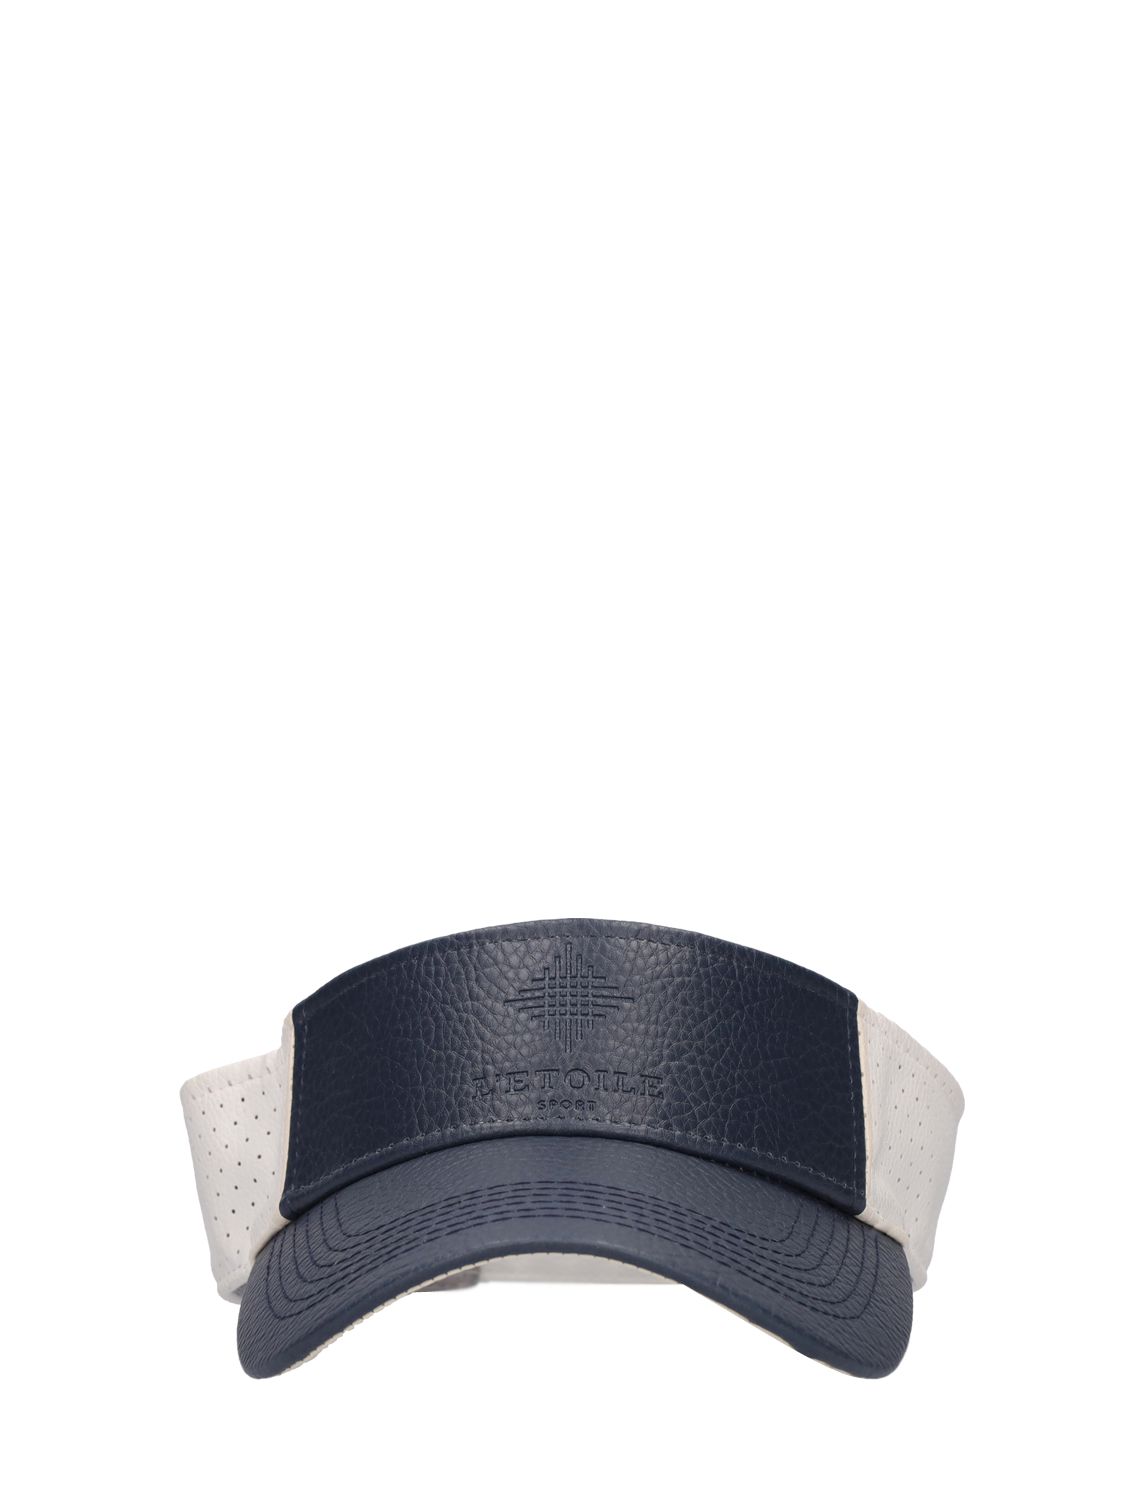 Perforated Leather Visor